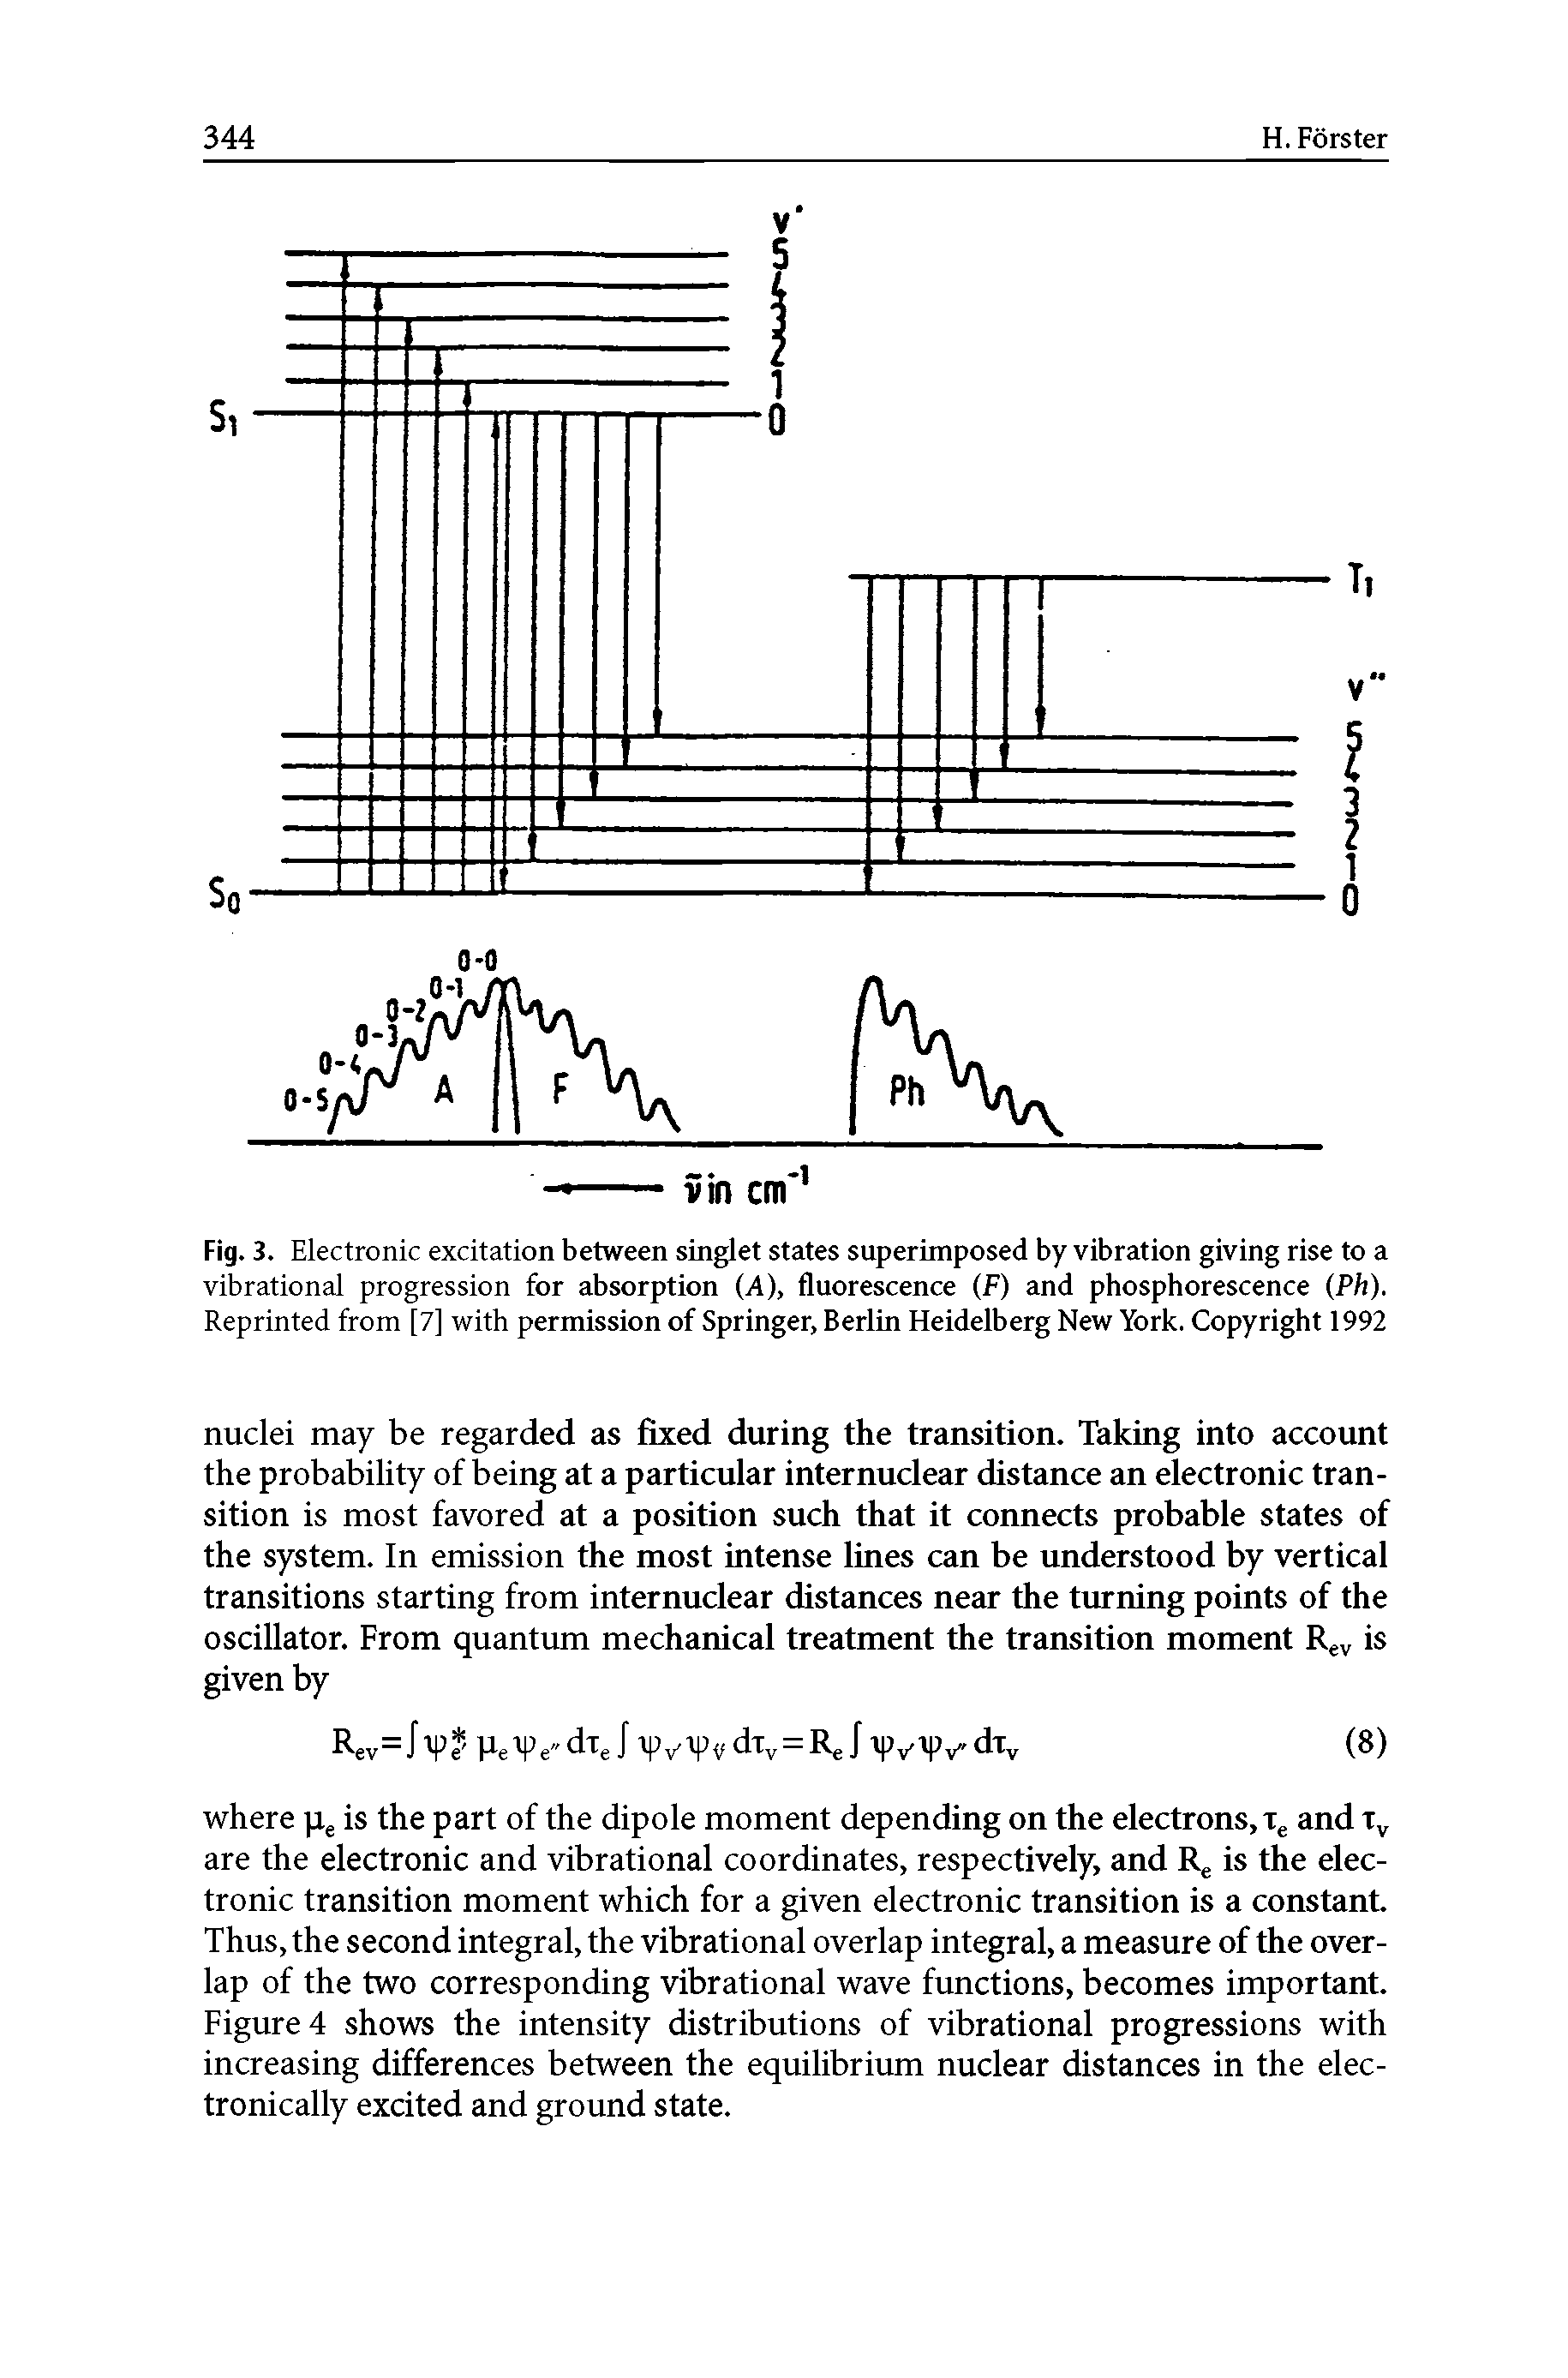 Fig. 3. Electronic excitation between singlet states superimposed by vibration giving rise to a vibrational progression for absorption (A), fluorescence (F) and phosphorescence (Ph). Reprinted from [7] with permission of Springer, Berlin Heidelberg New York. Copyright 1992...